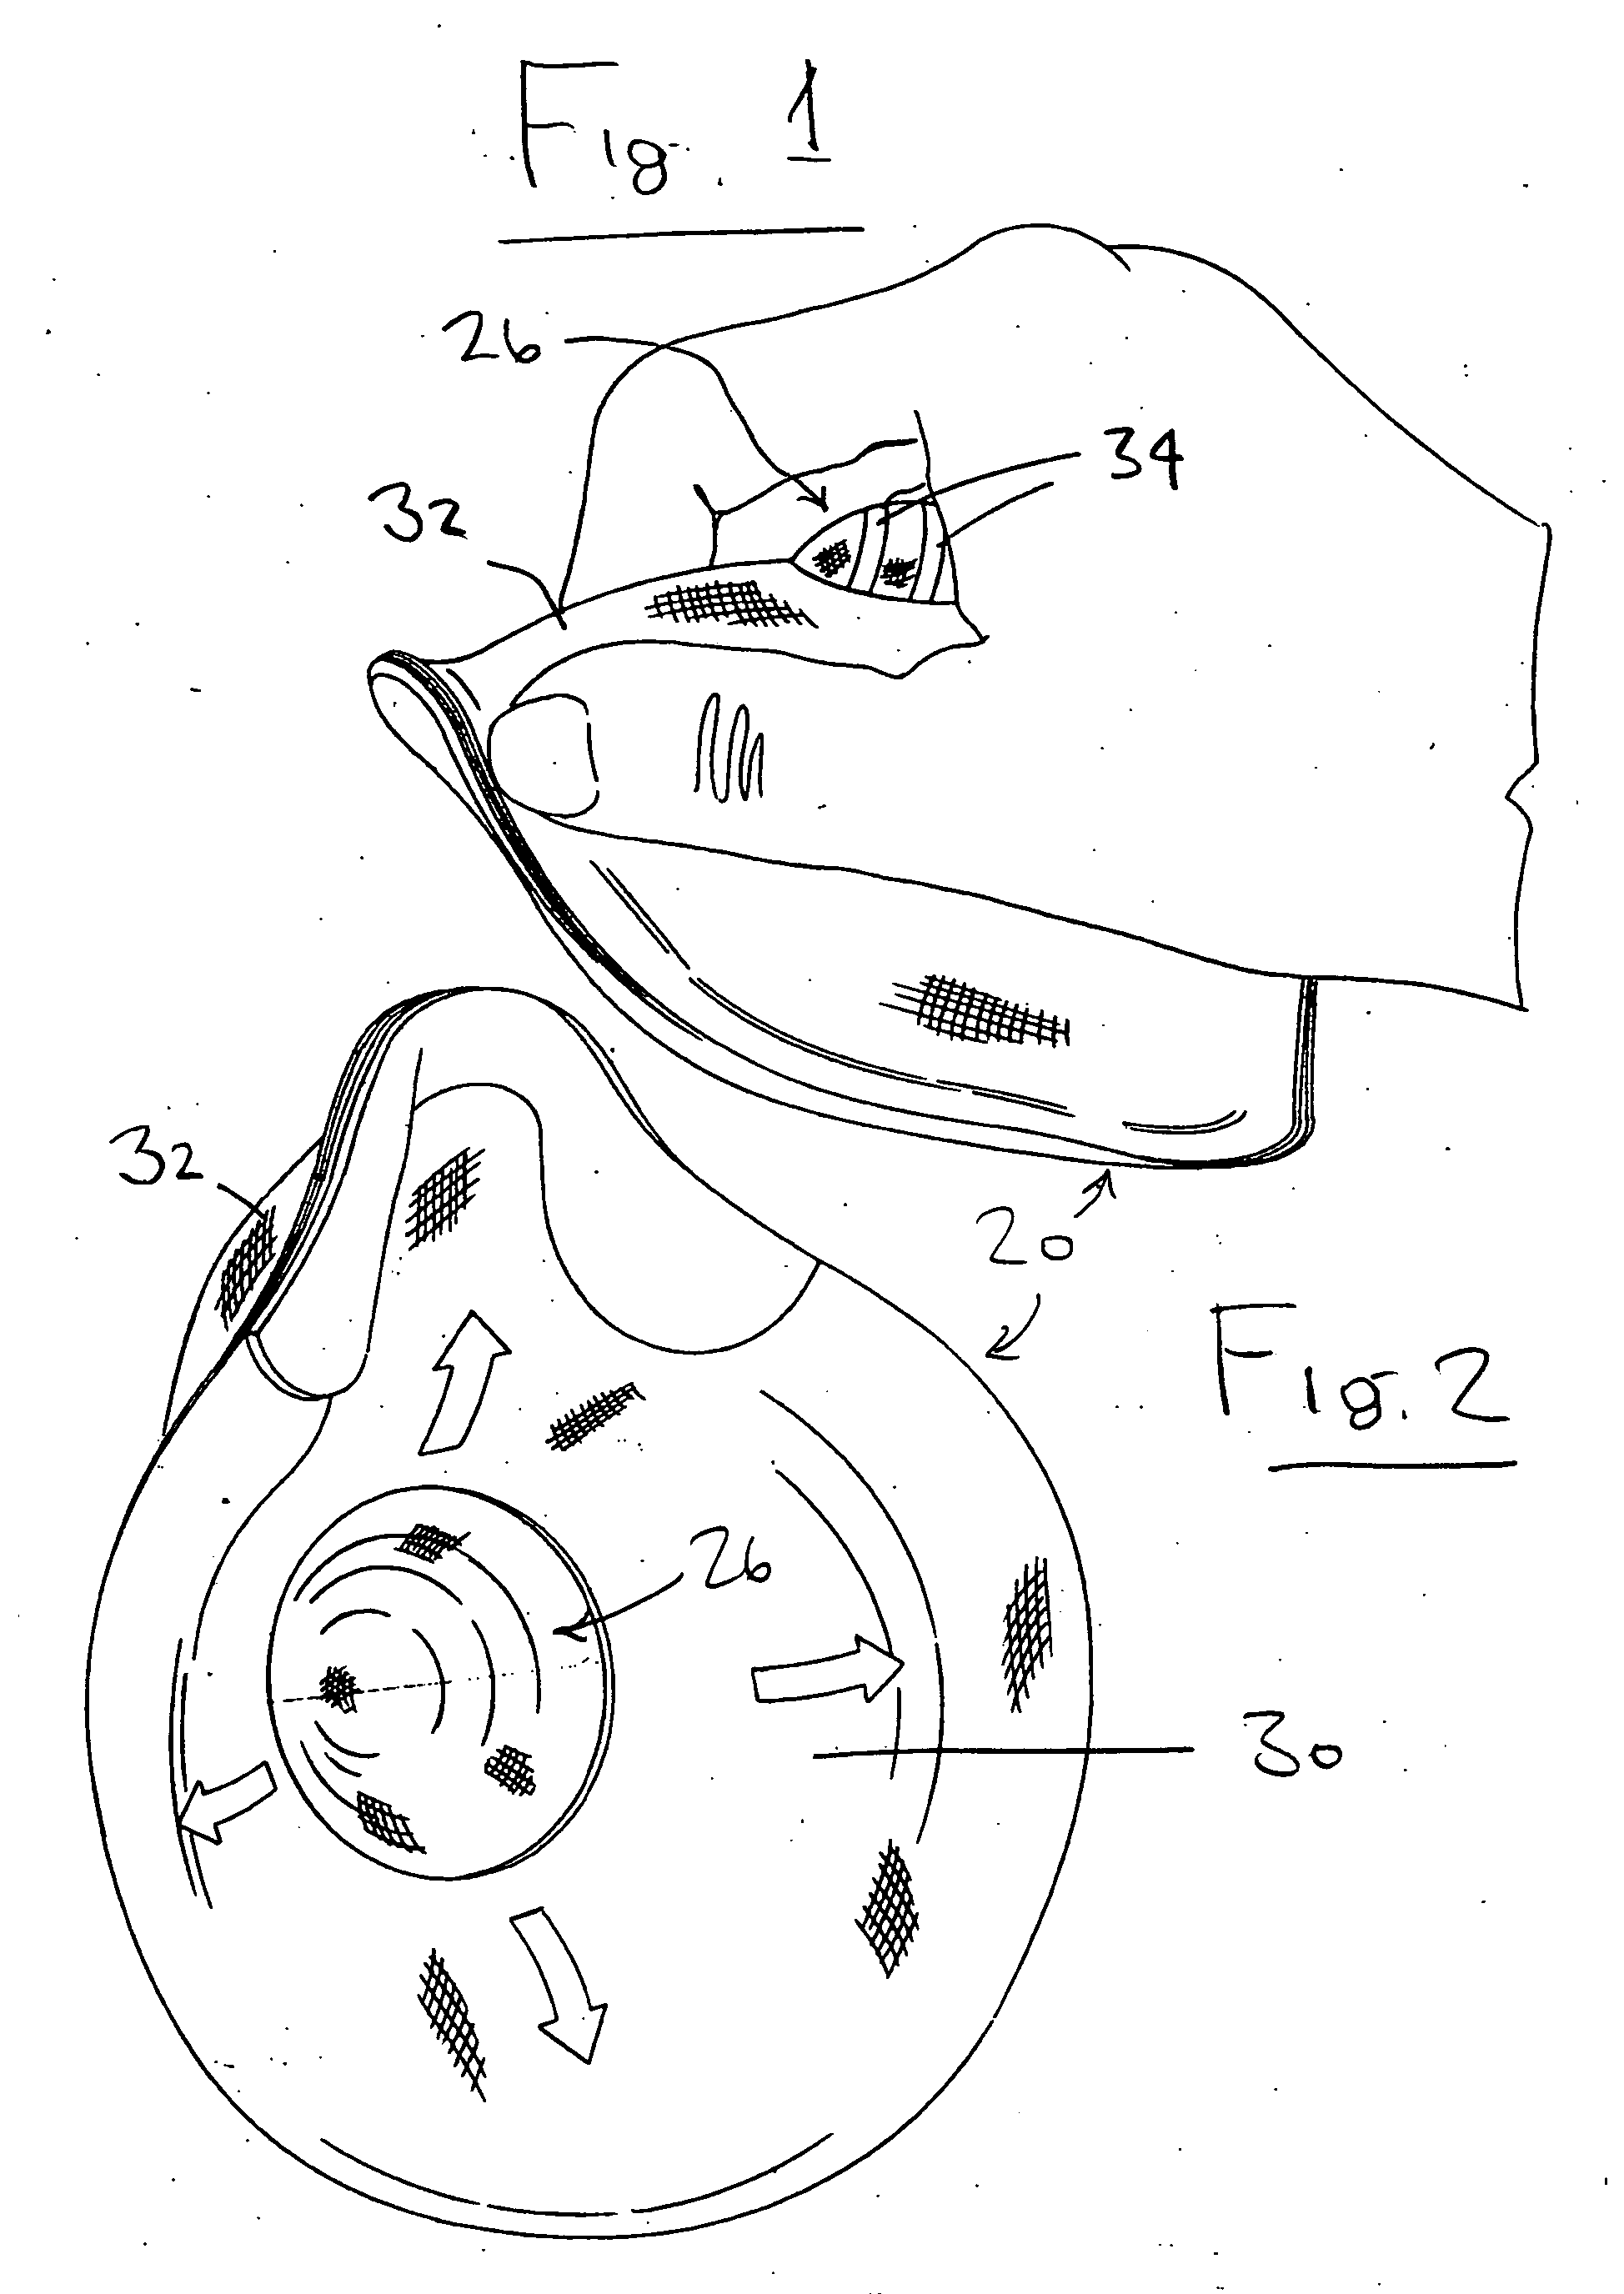 Personal hygiene device and method